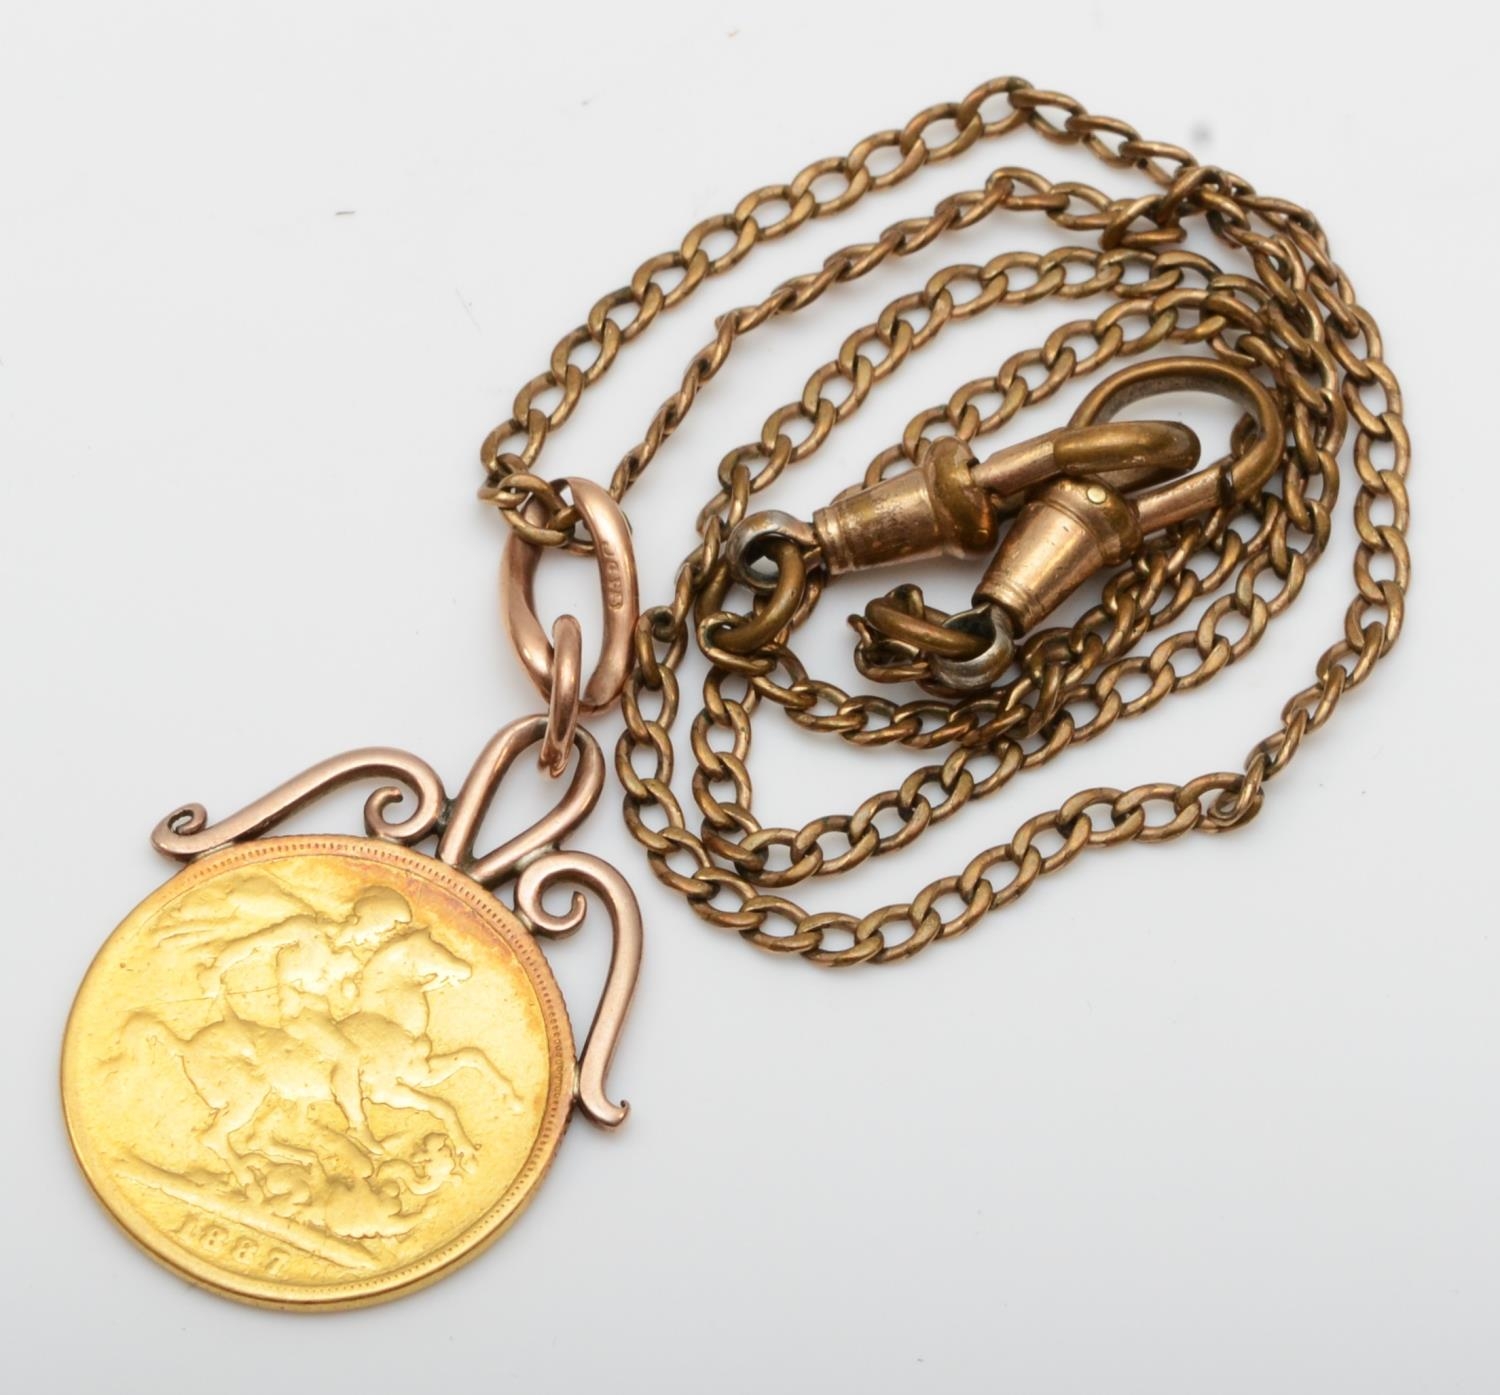 A Victorian Old Head 1887 sovereign, hard soldered as a pendant, metal chain, pendant 9.2gm - Image 3 of 3